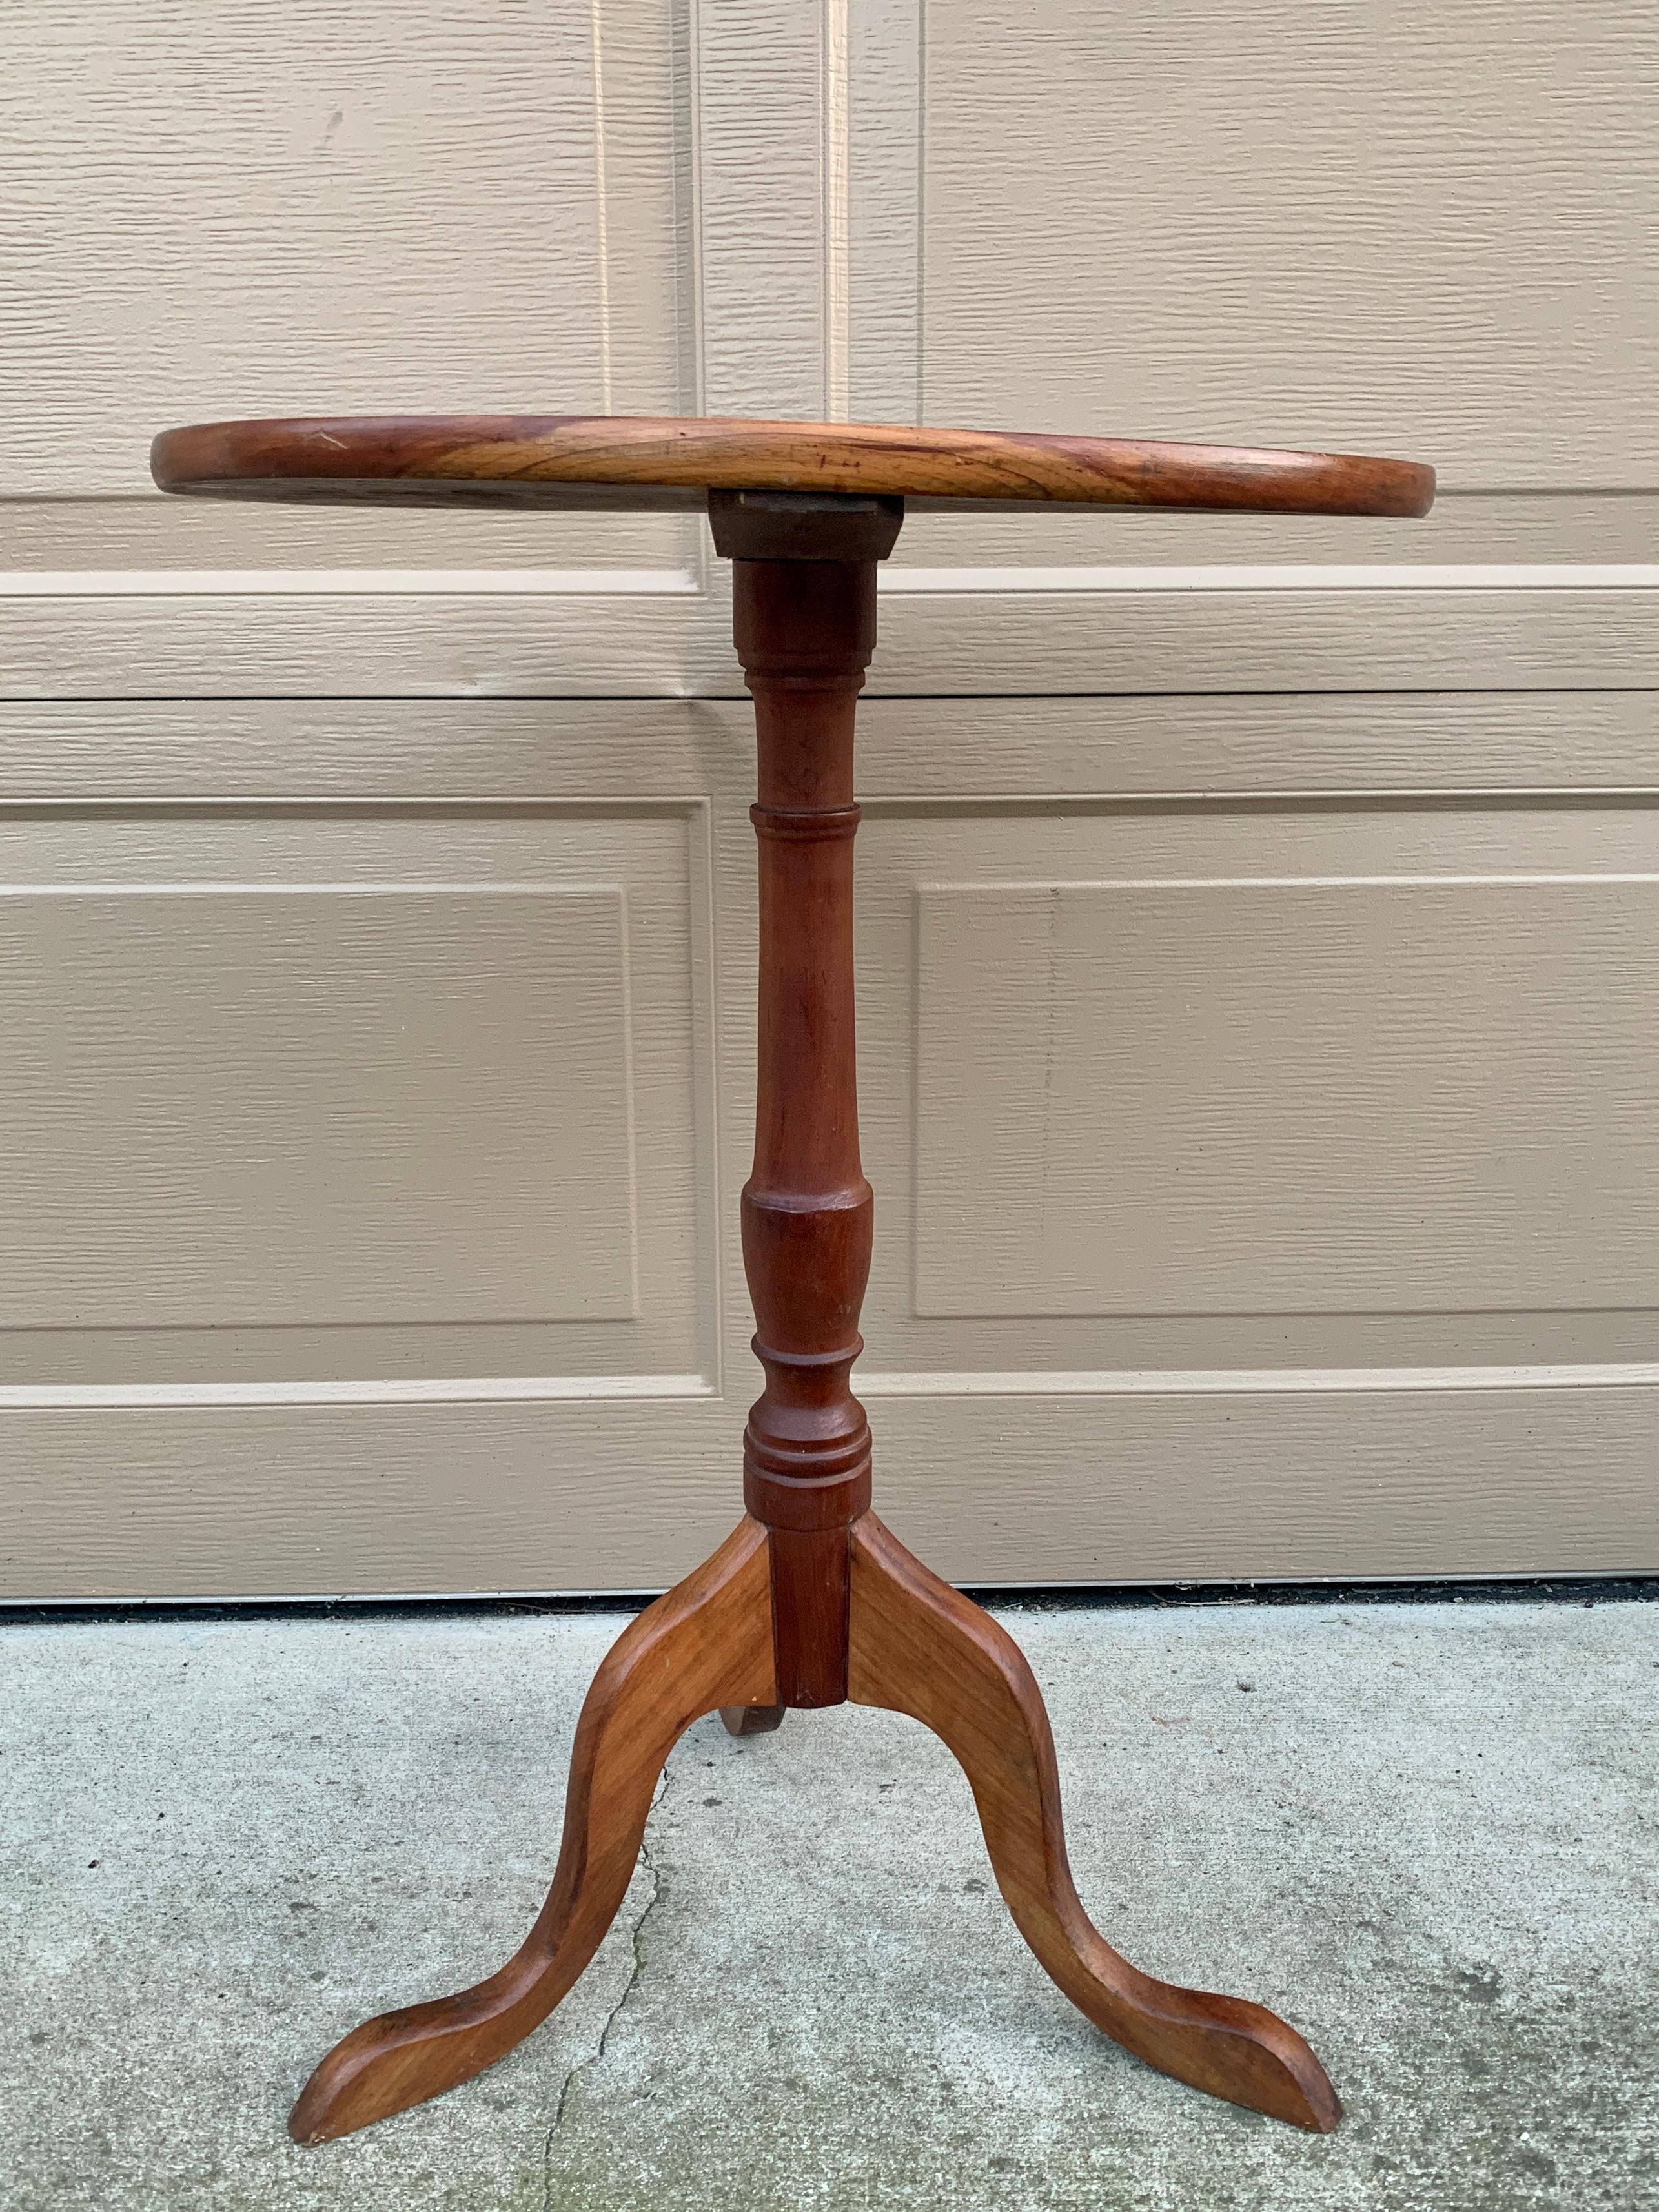 A gorgeous American colonial or Queen Anne style cherry wood candle stand or side table

USA, Mid 19th Century

Measures: 20.5